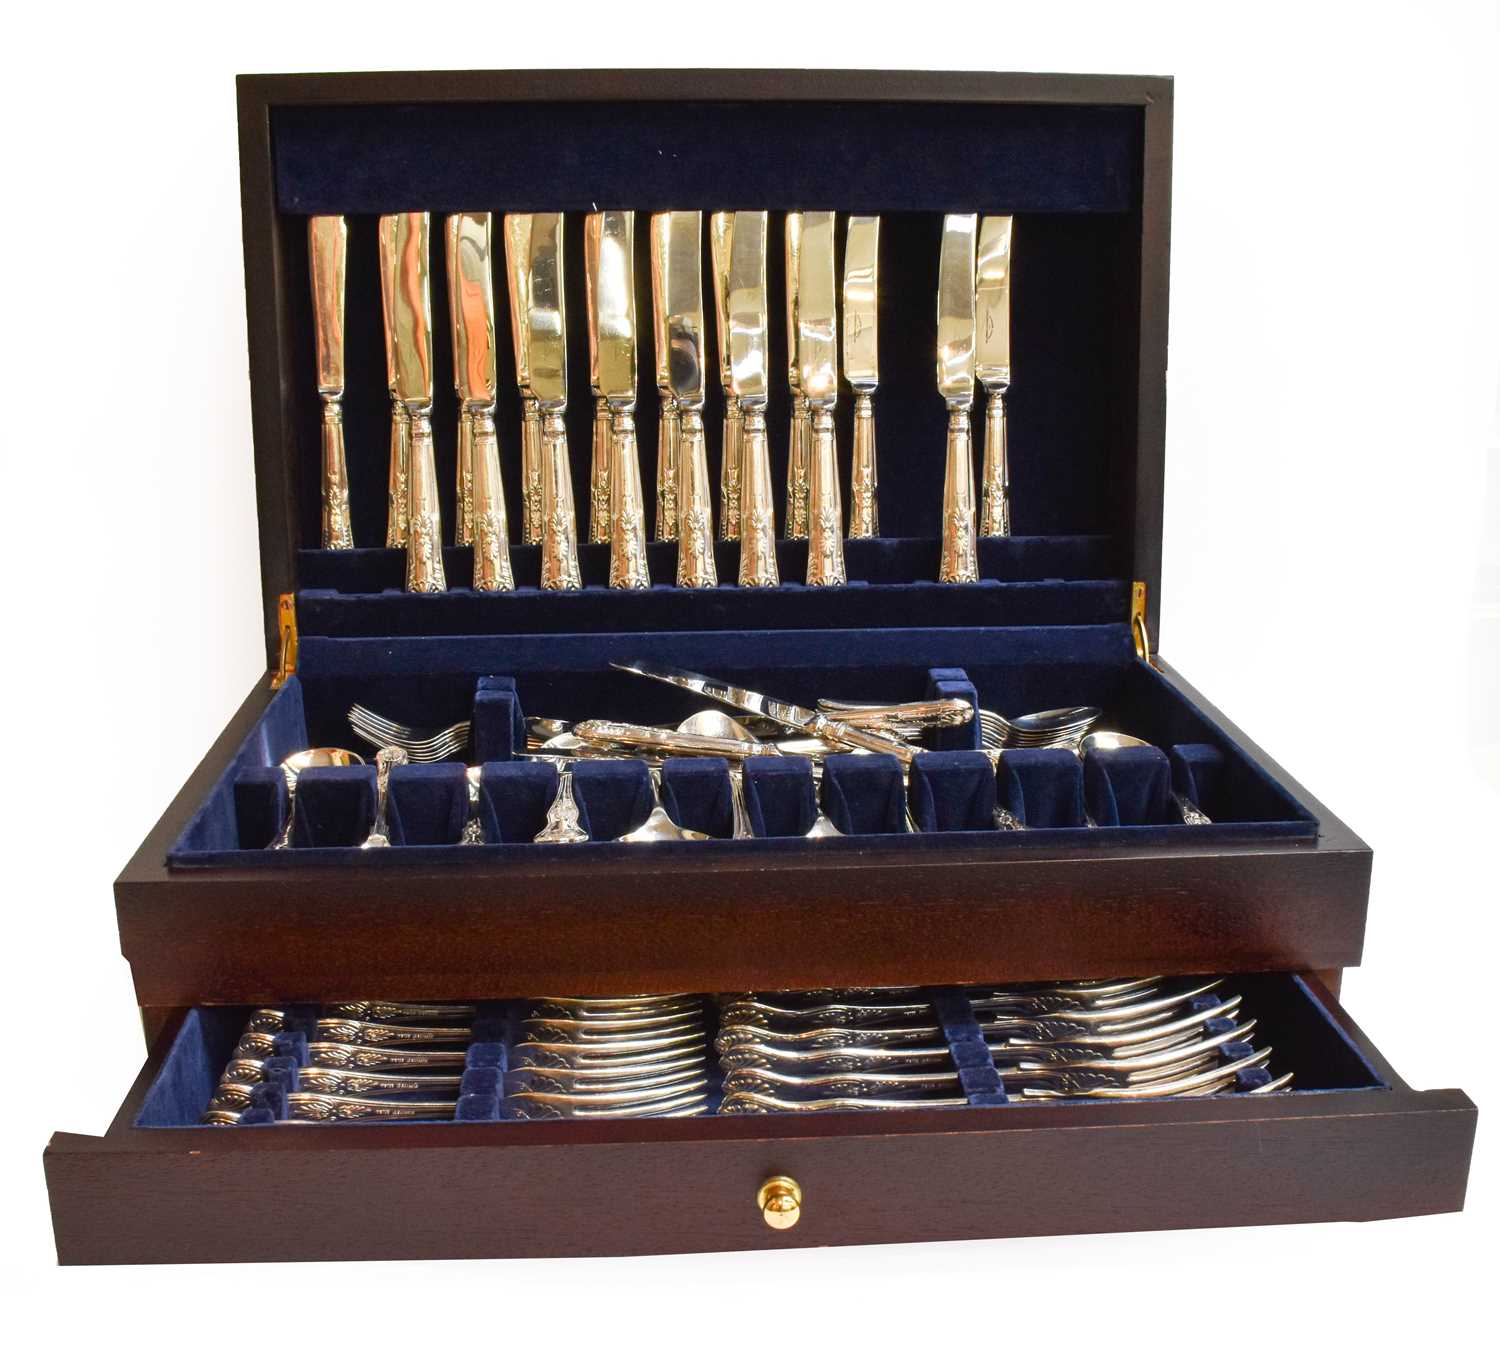 Mahogany cased silver plated canteen of Kings pattern cutlery stamped Harrods Ltd, twelve place